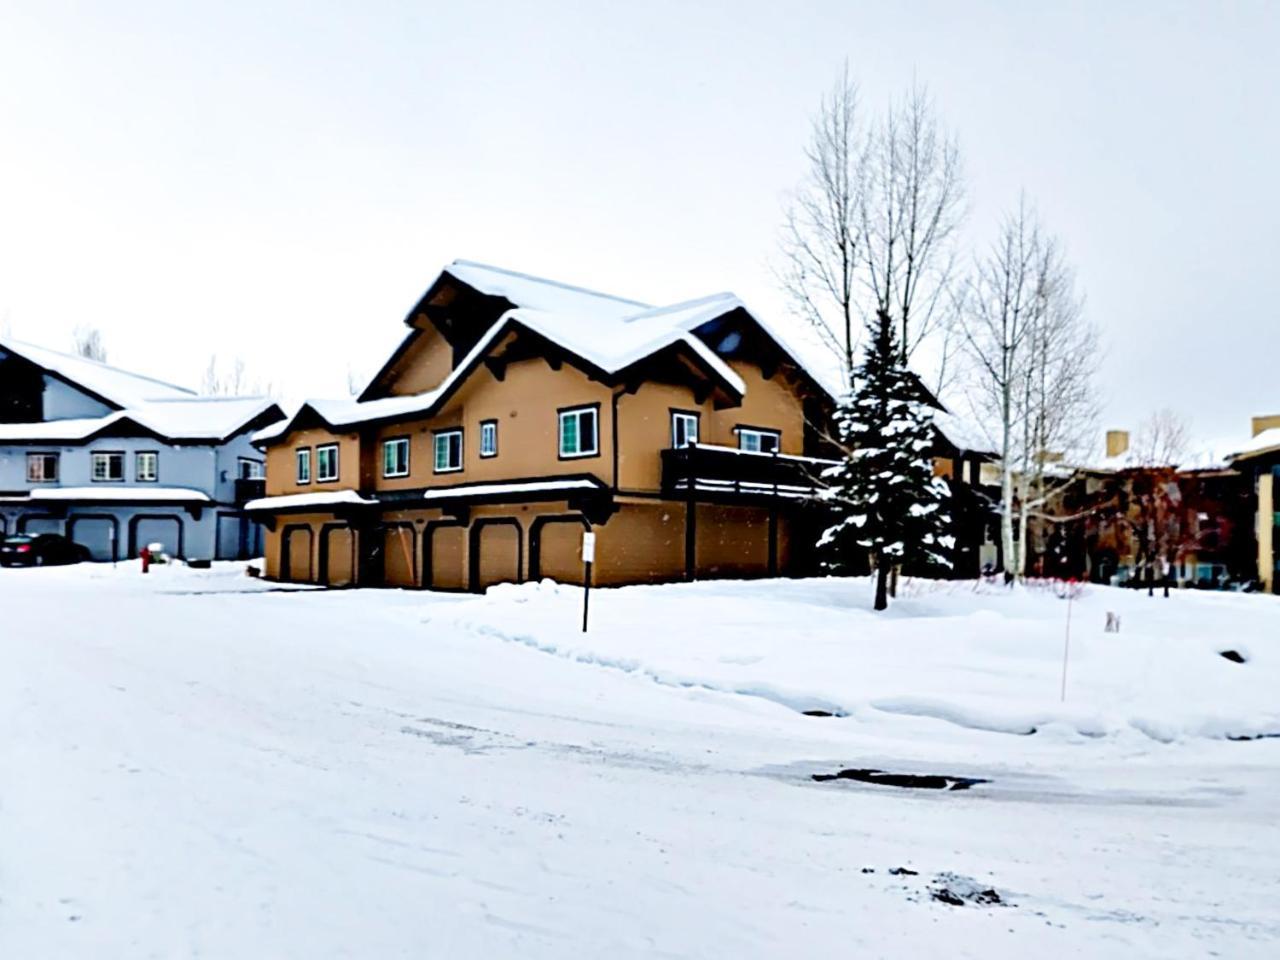 Covey Townhouse Unit 5 Townhouse Steamboat Springs Bagian luar foto